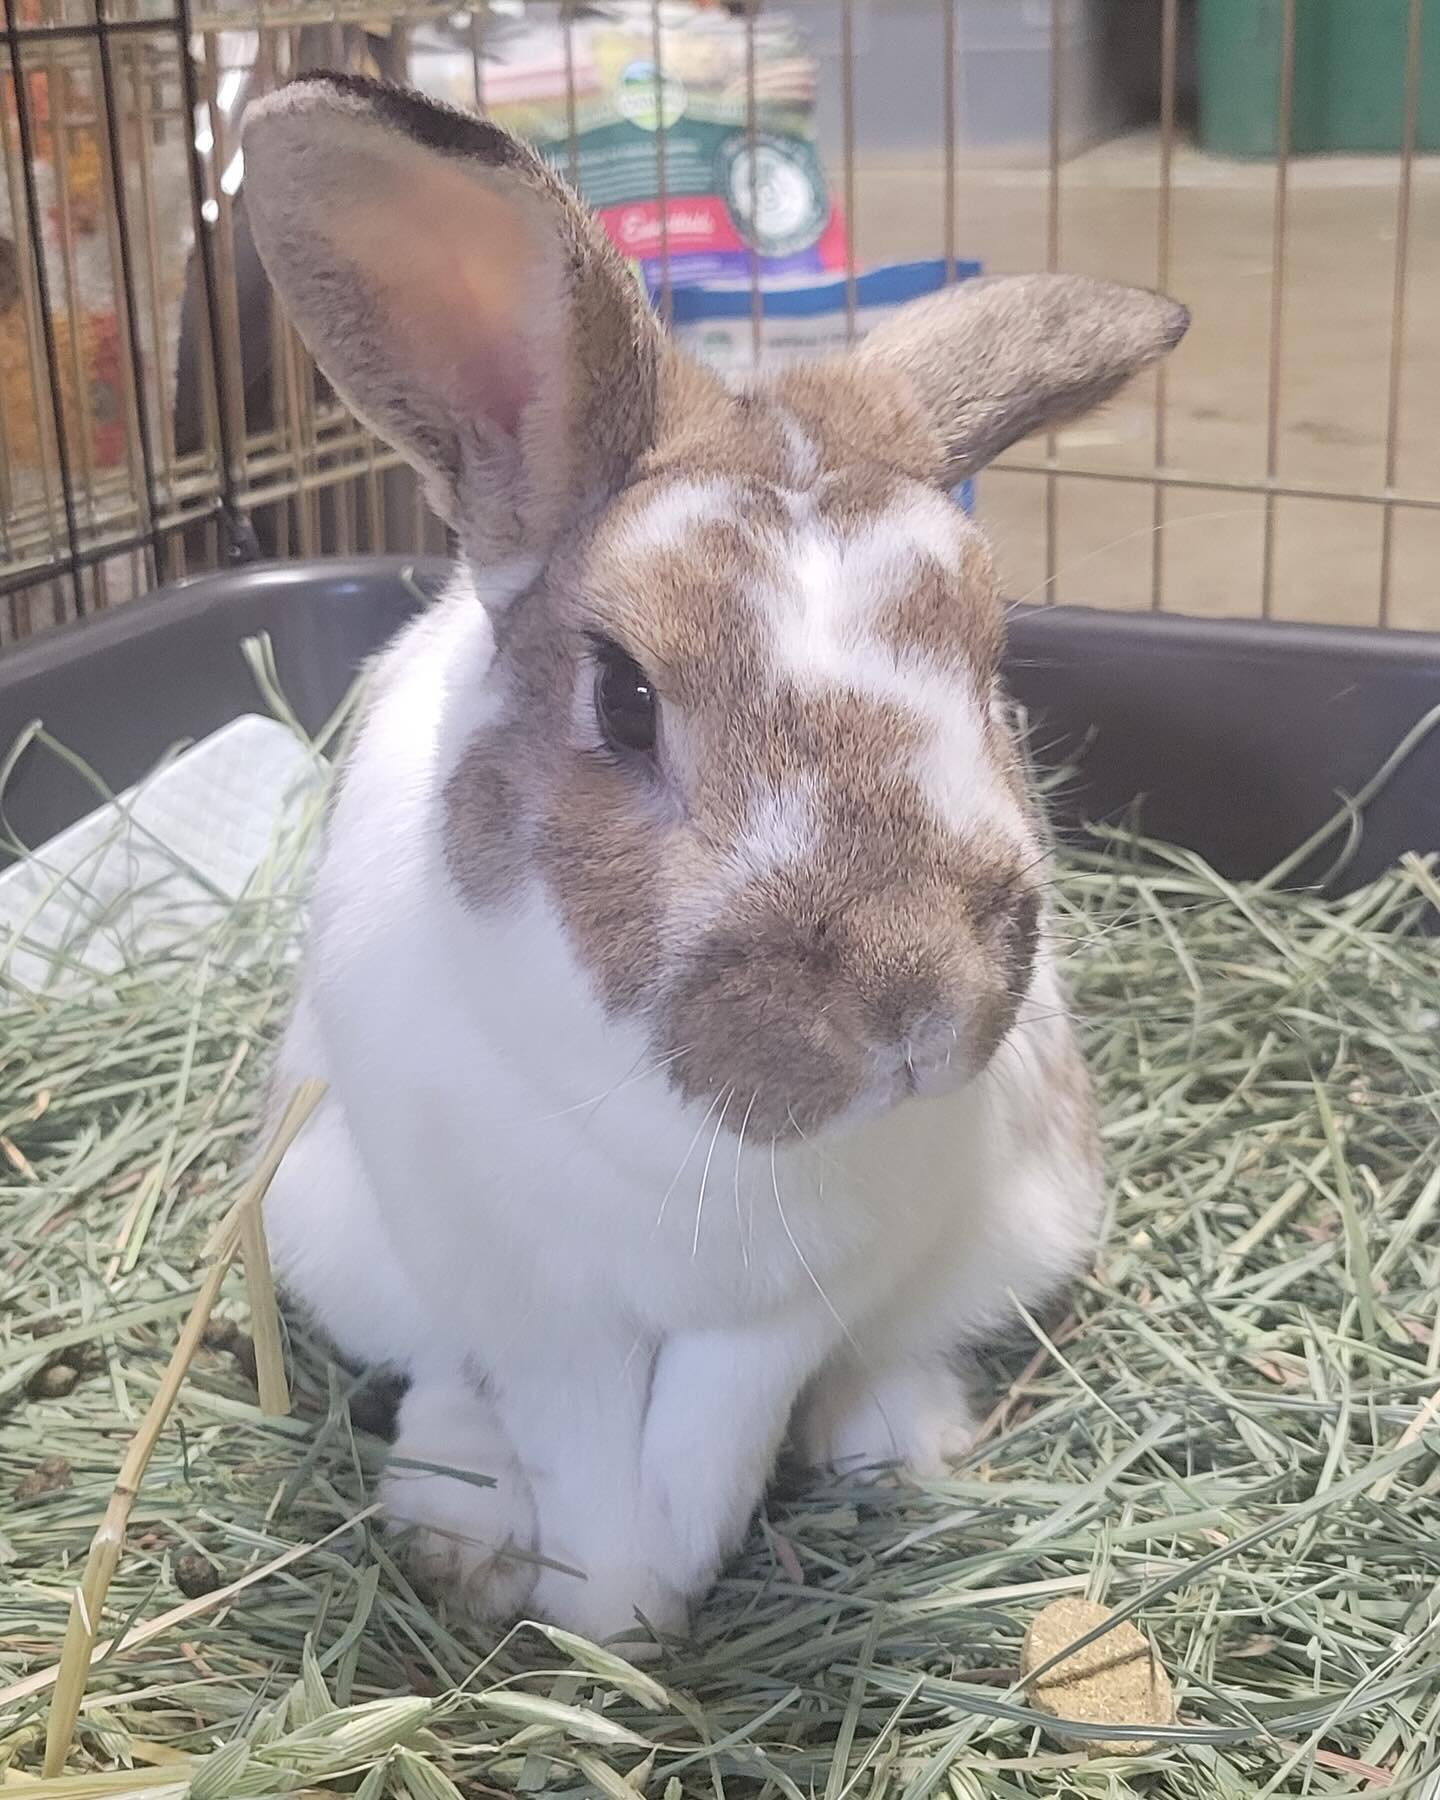 Our newest intake Peter needs your help!

Peter came to Rabbit Advocates as an emergency medical transfer due to a fractured elbow. His injury occured before he was caught so we are unsure how it happened, but of course, we would help.

Peter is a de